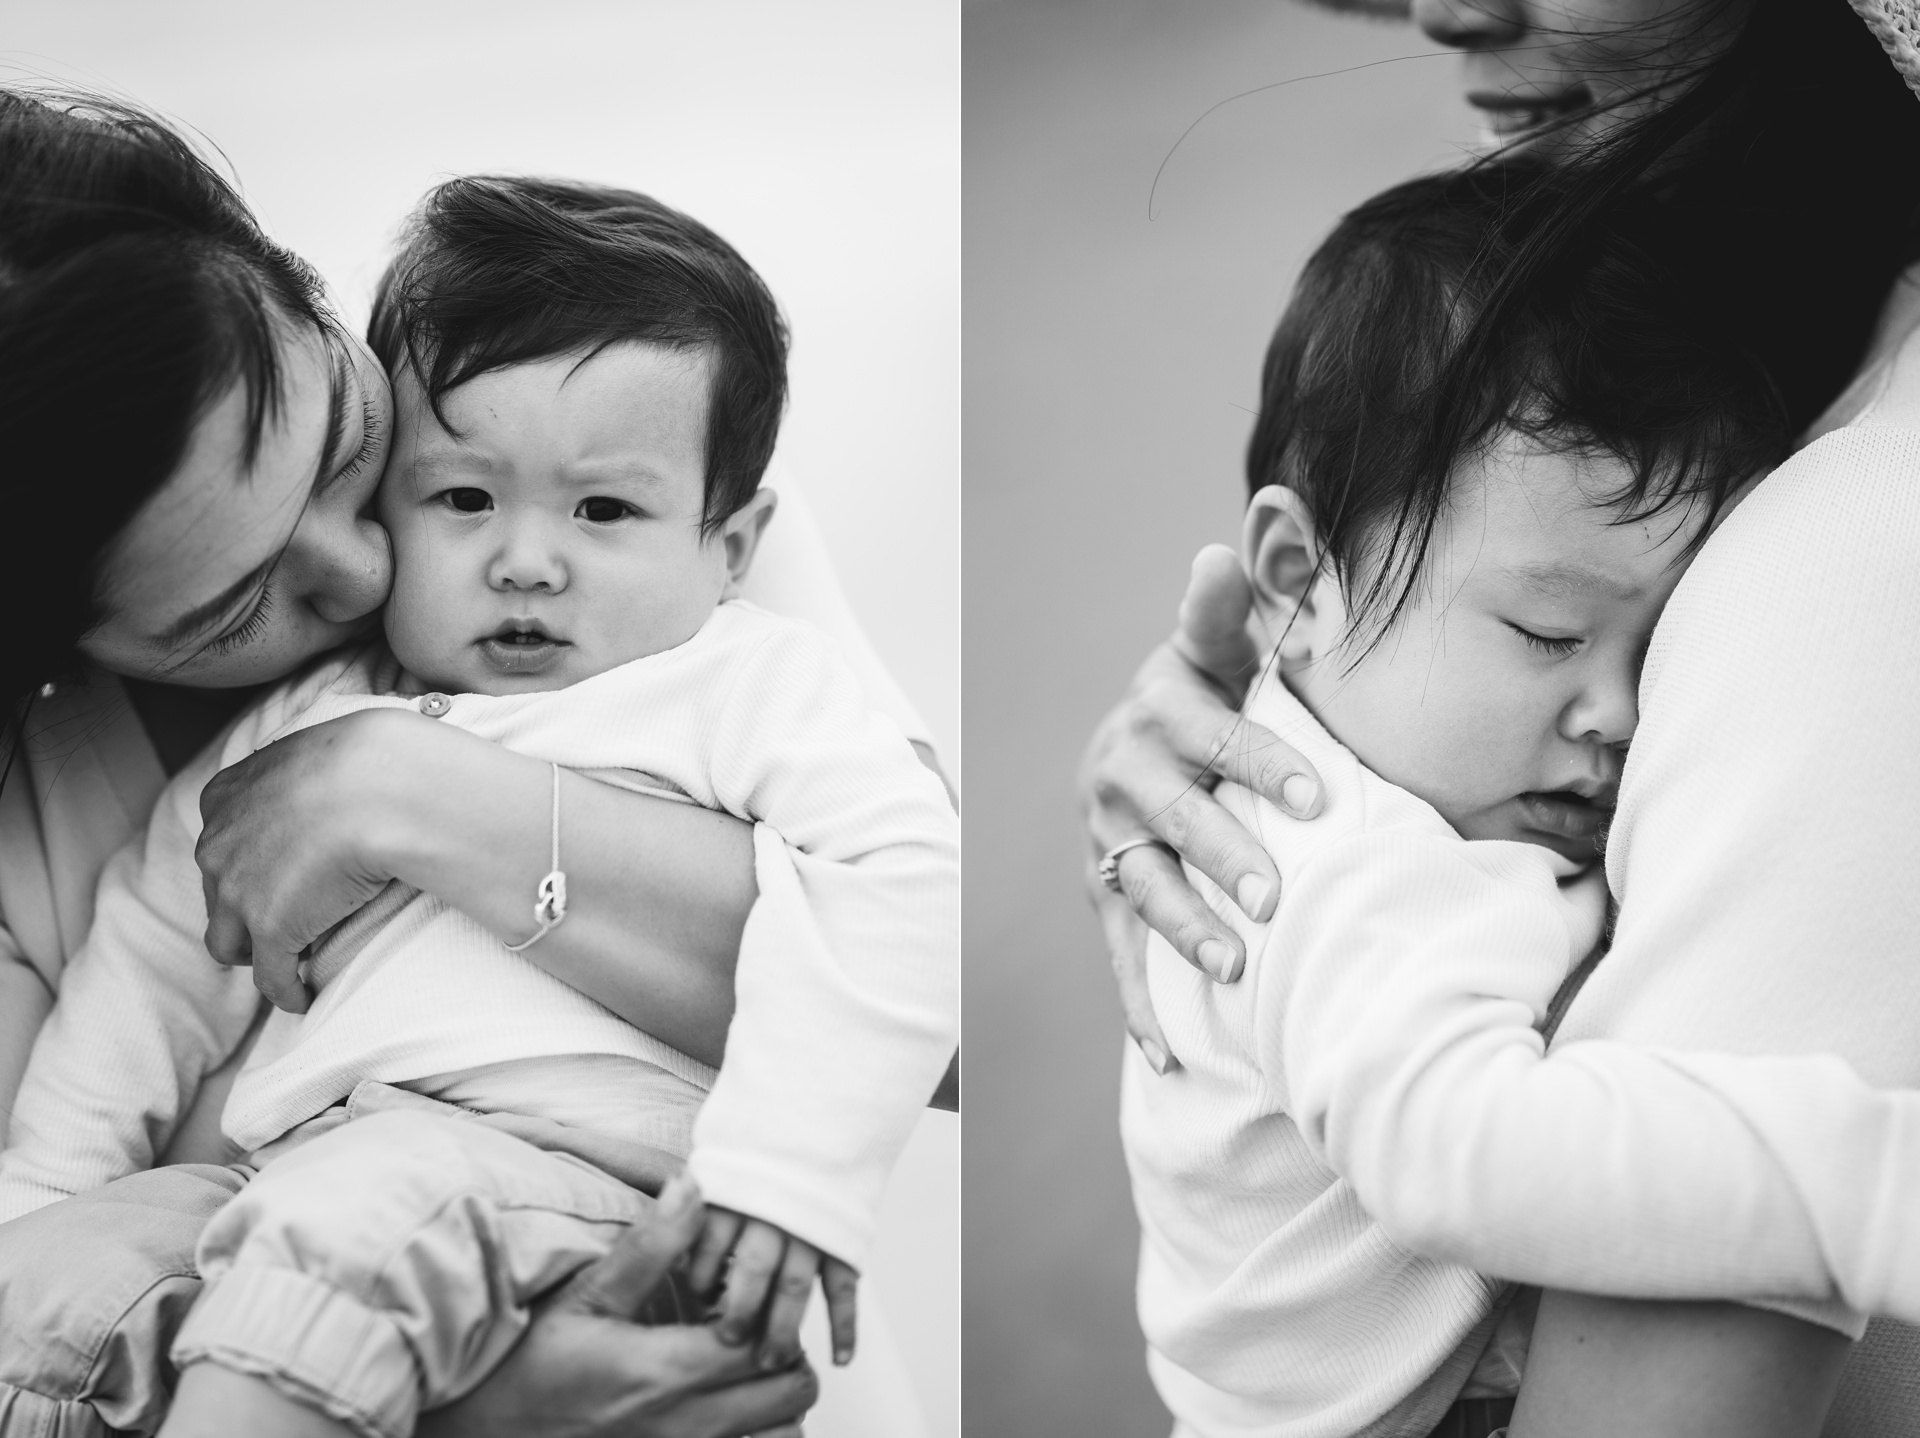 Black & white images of a mother cuddling a baby boy during a family photography session in North Devon